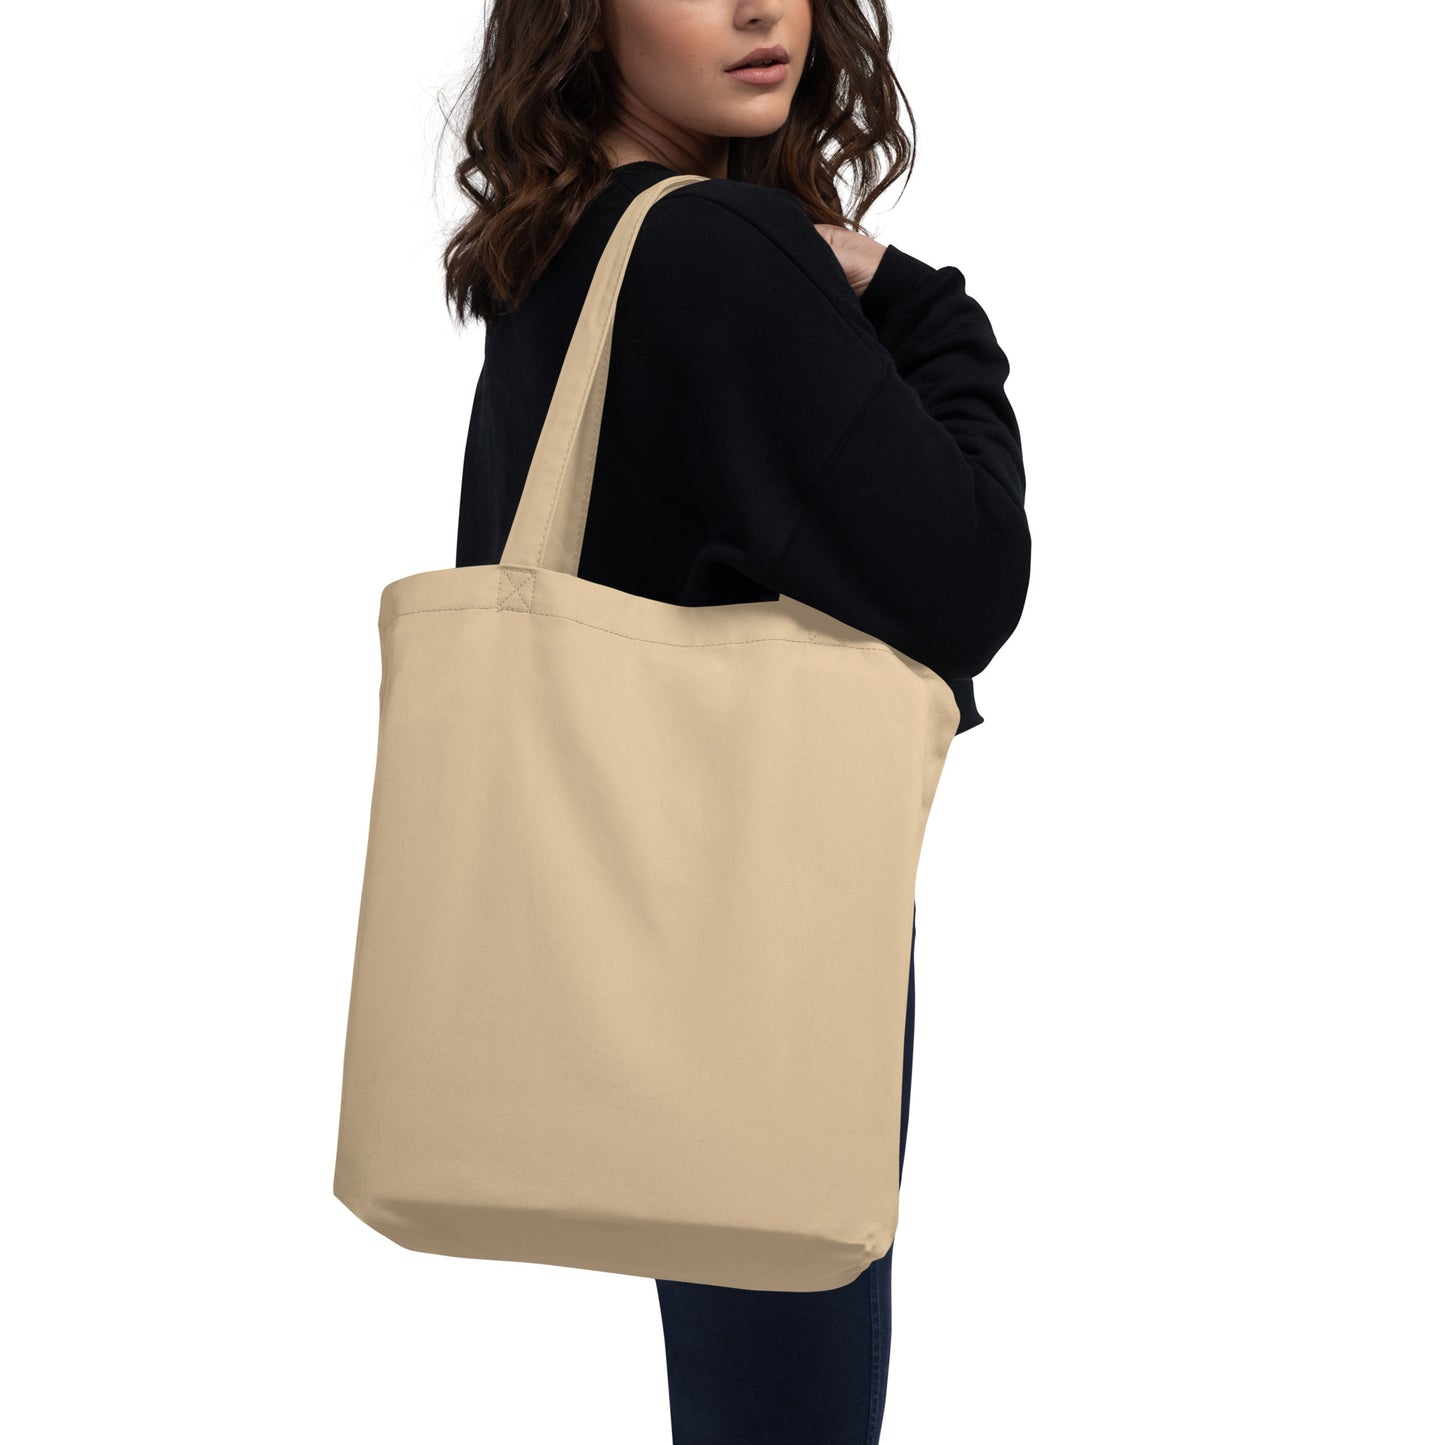 Rights for All - Eco Tote Bag